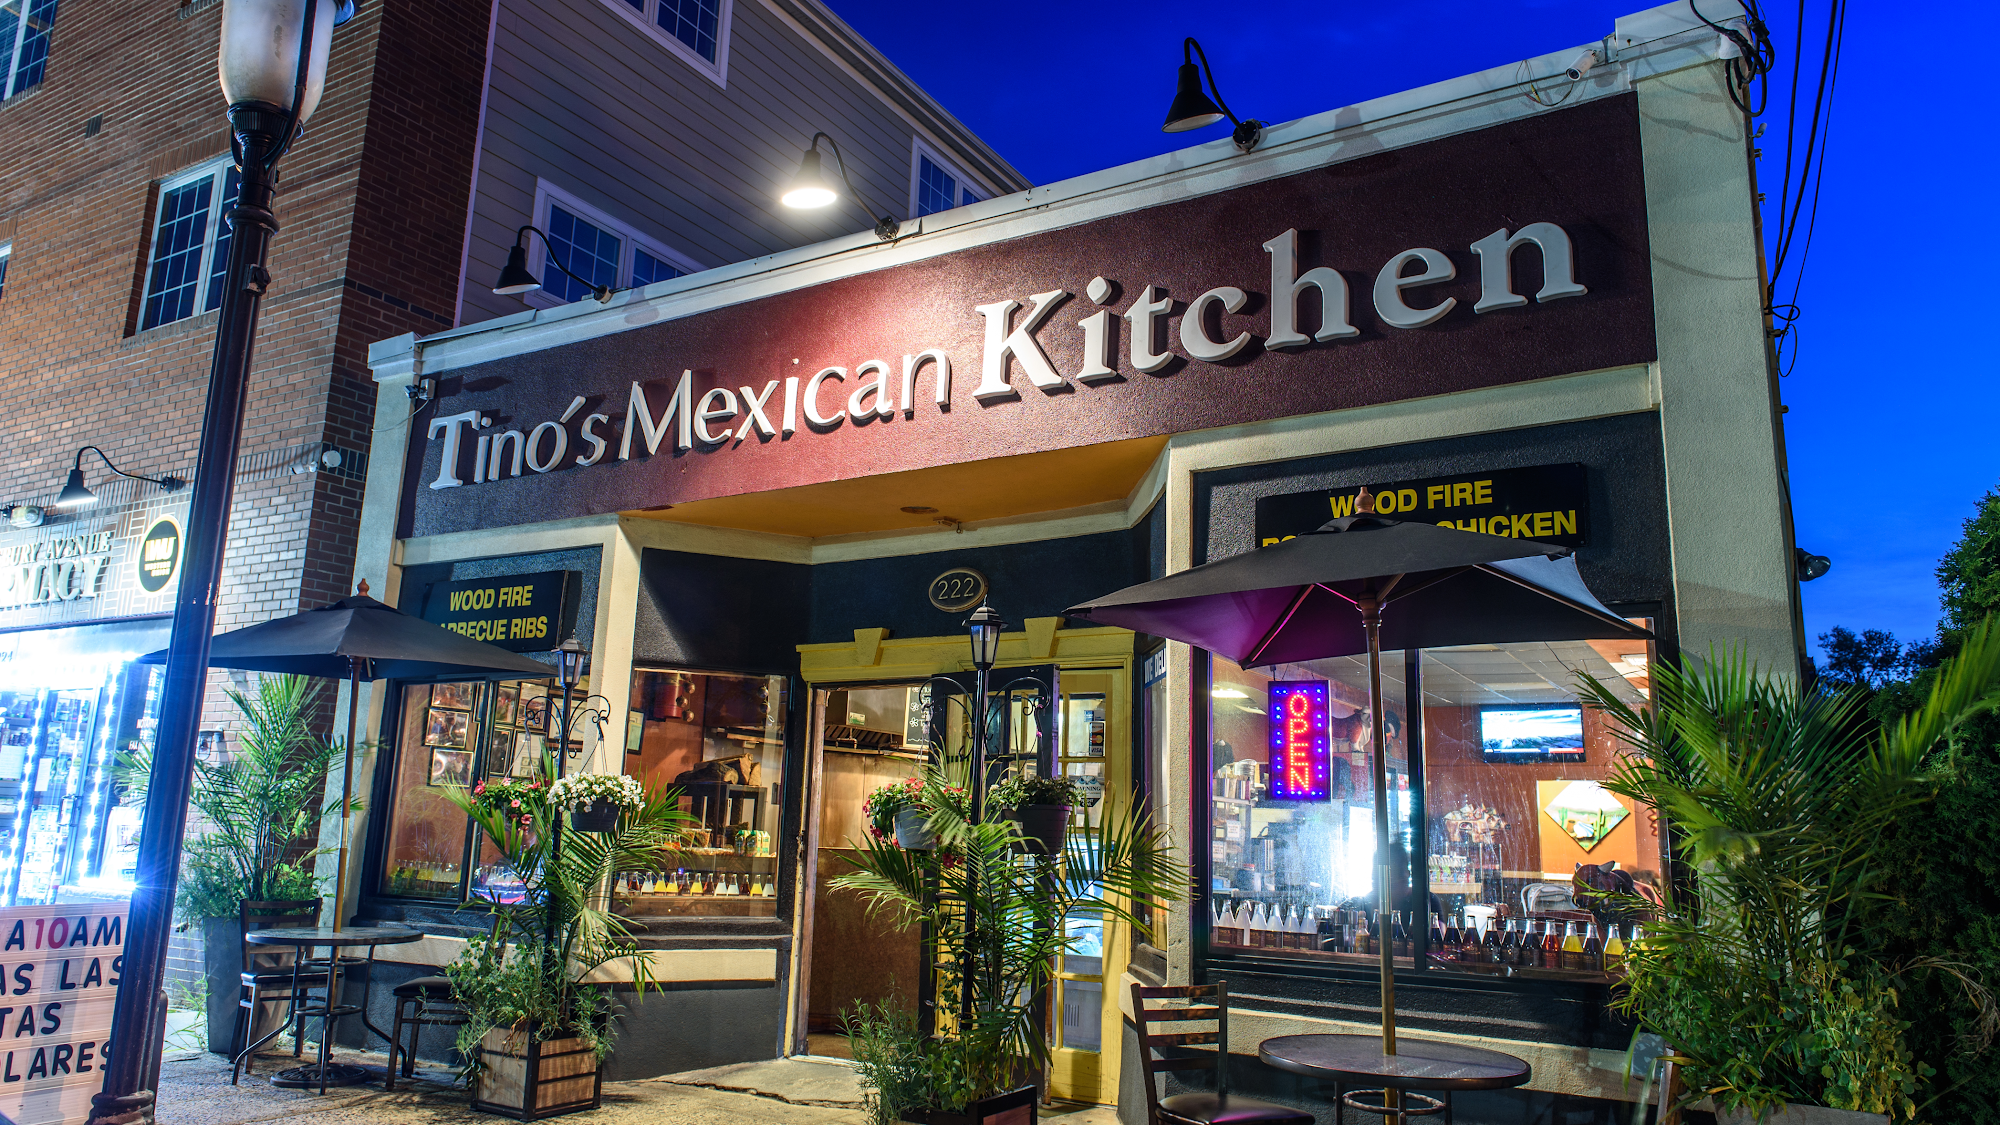 Tino’s Mexican kitchen